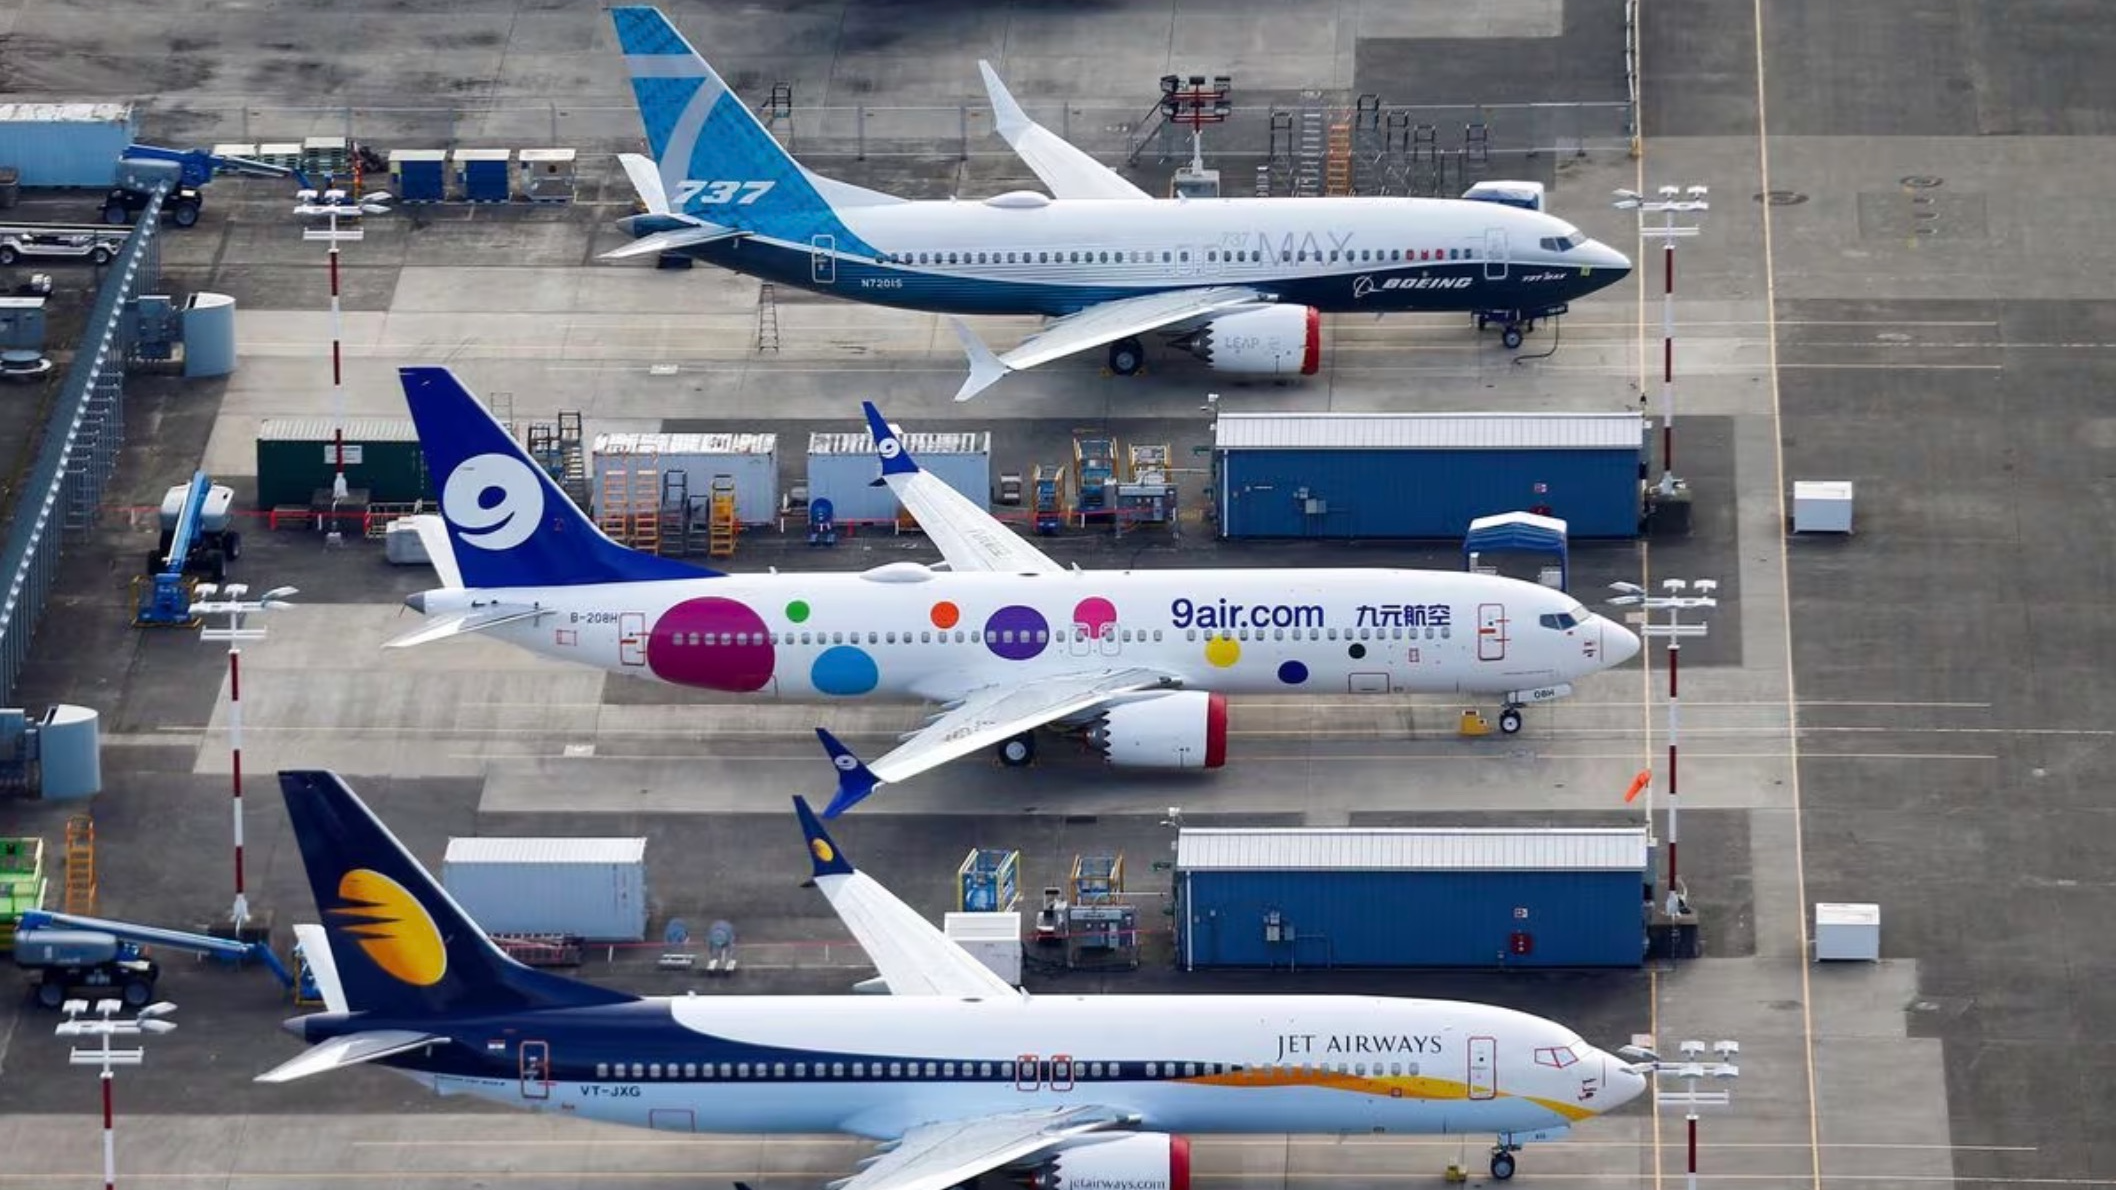 An aerial photo shows Jet Airways and 9 Air Boeing 737 MAX airplanes, as well as a 737 MAX 7, grounded at Boeing Field in Seattle, Washington, U.S. /Reuters